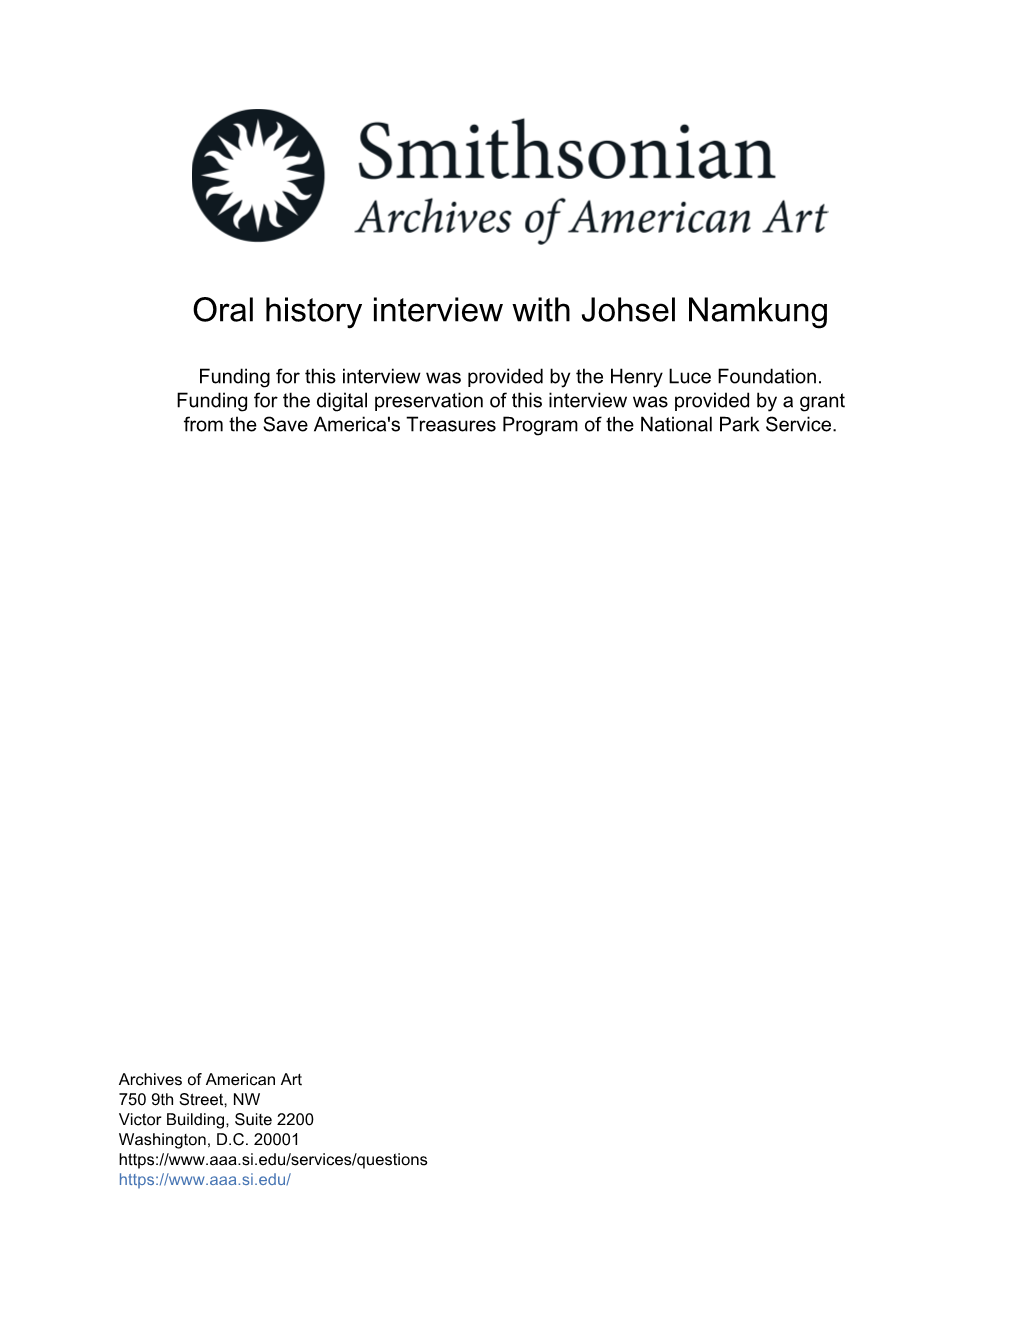 Oral History Interview with Johsel Namkung